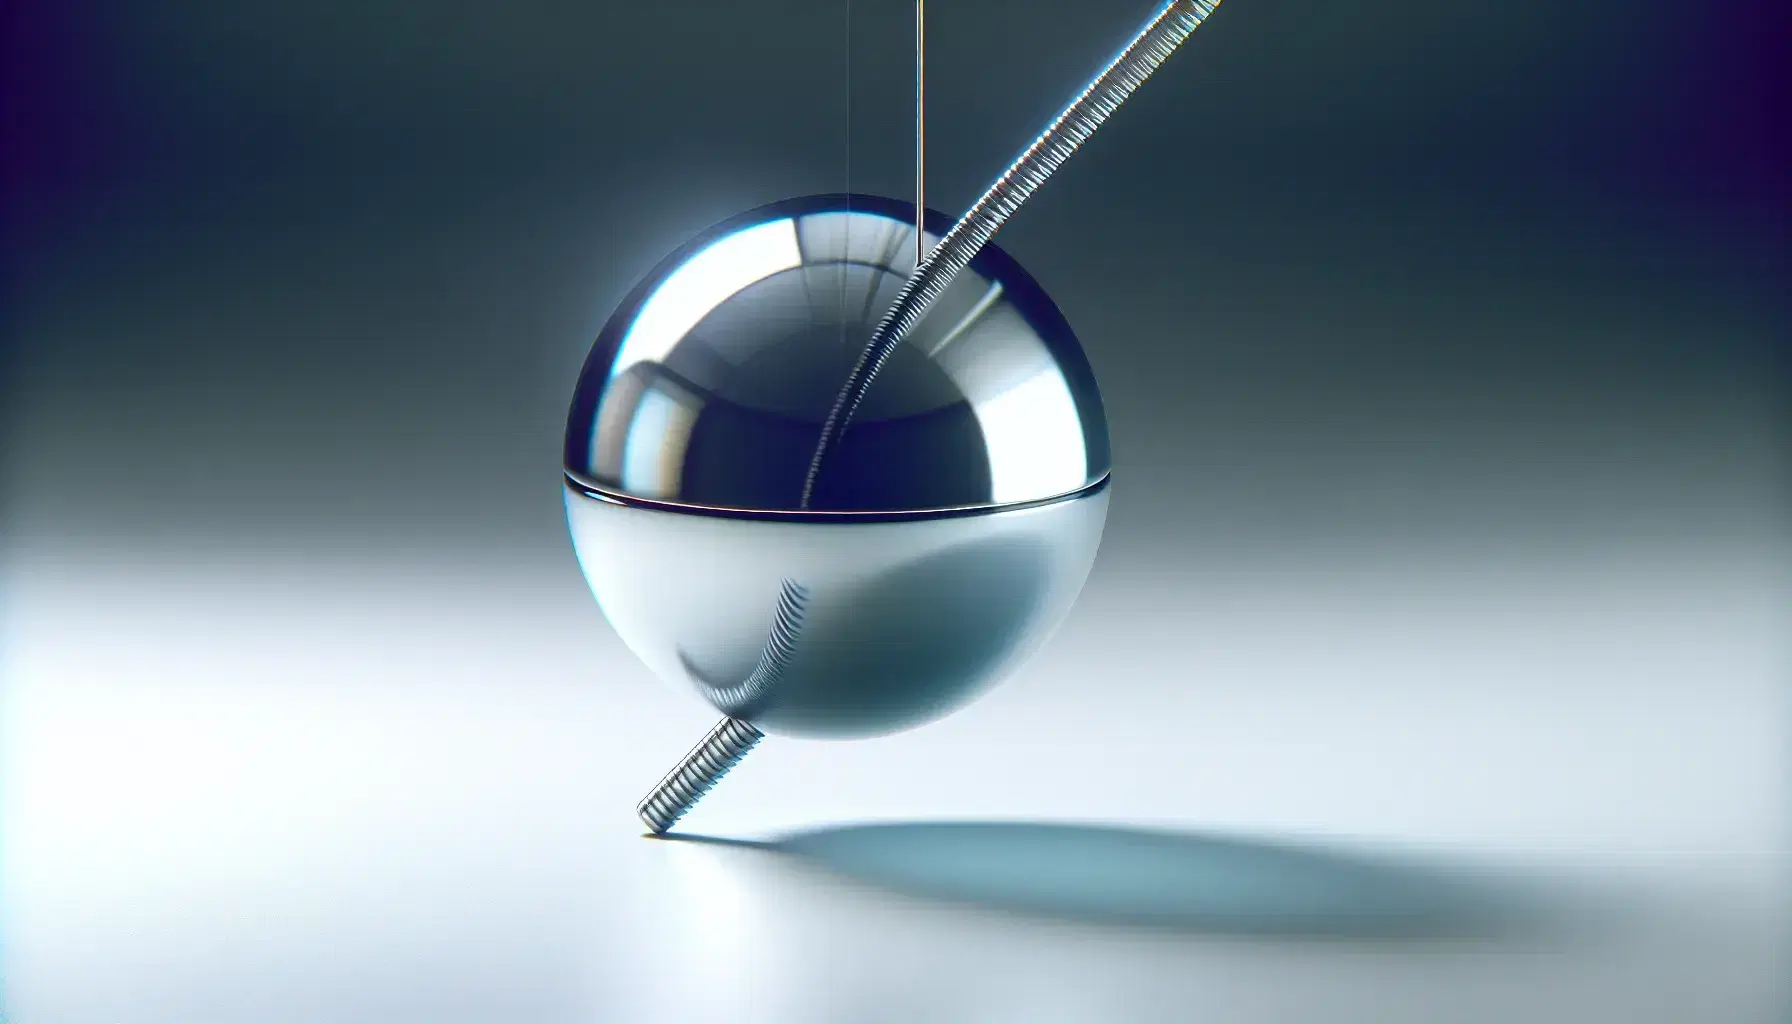 Close-up view of a metallic pendulum in motion with a shiny spherical bob and thin rod against a blurred white to gray gradient background.